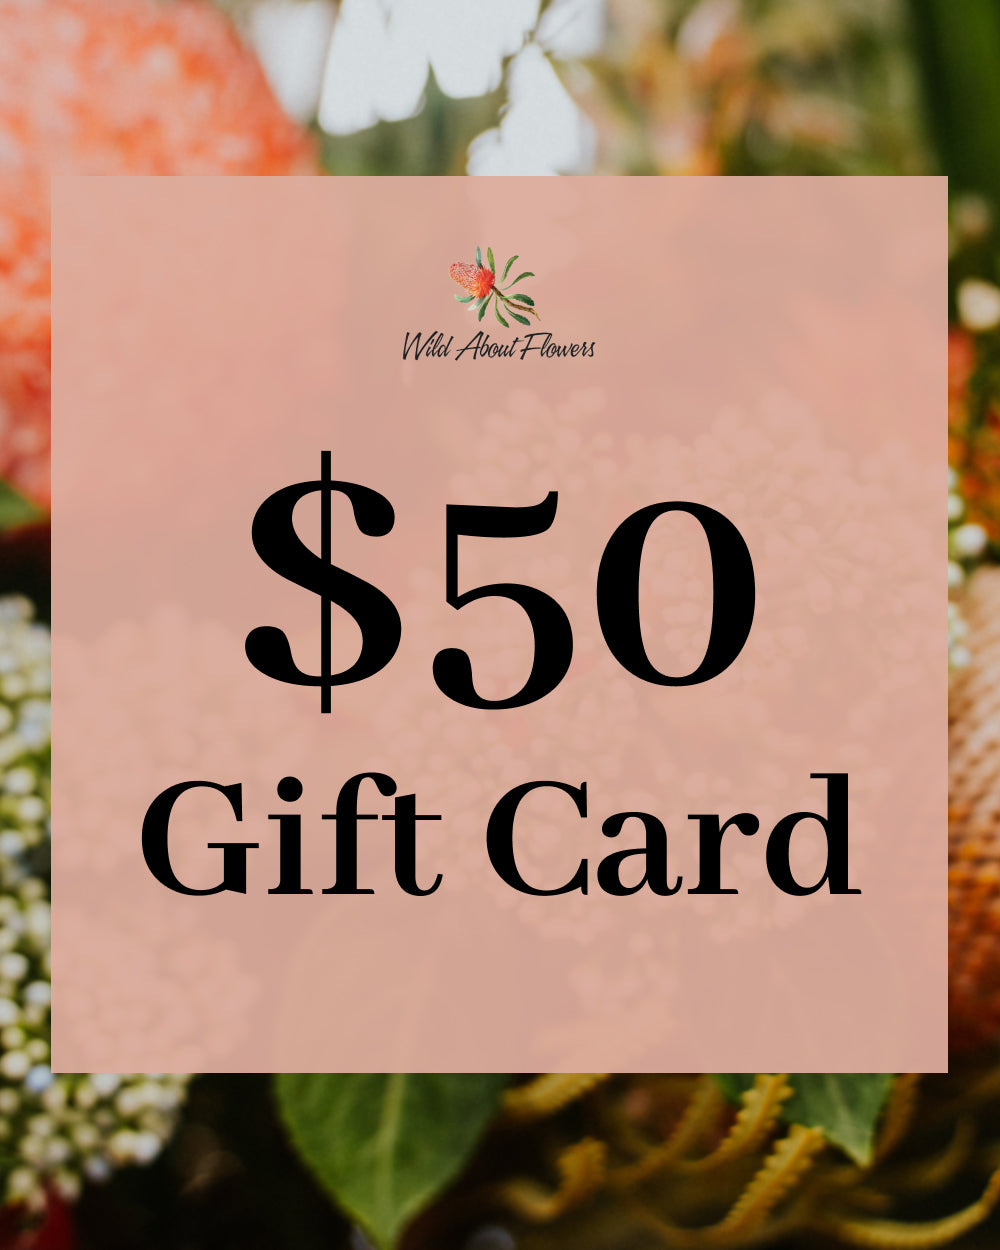 Wild About Flowers Gift Card